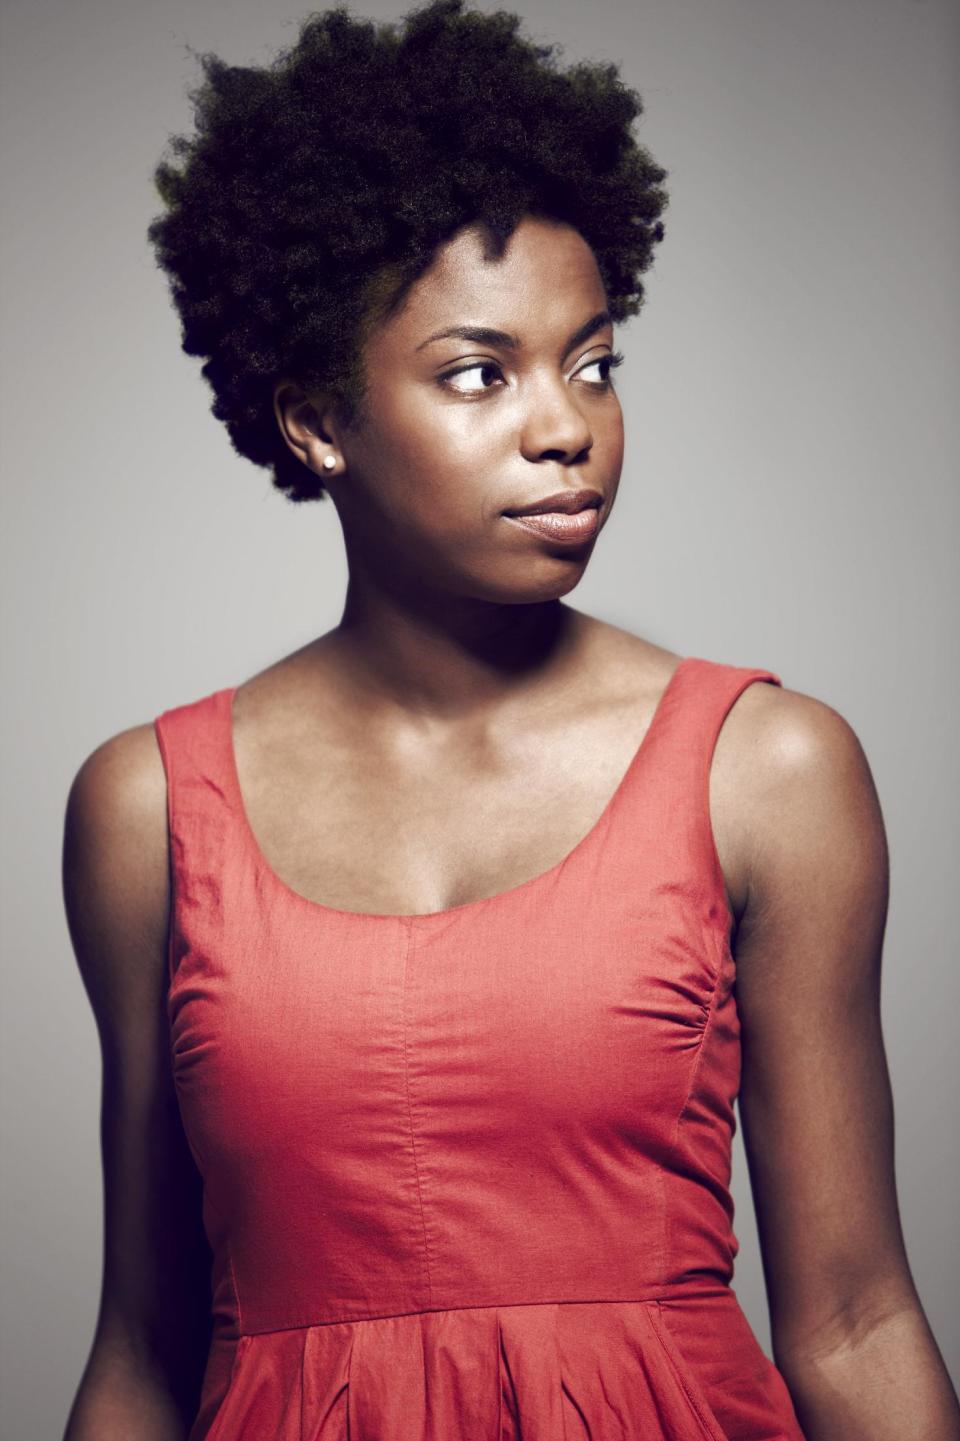 This Feb. 11, 2008 photo provided by Cate Hellman Photography shows actress Sasheer Zamata. Zamata, 27, from Indianapolis, will join the cast of "Saturday Night Live," for the Jan. 18 episode. (AP Photo/Cate Hellman Photography)